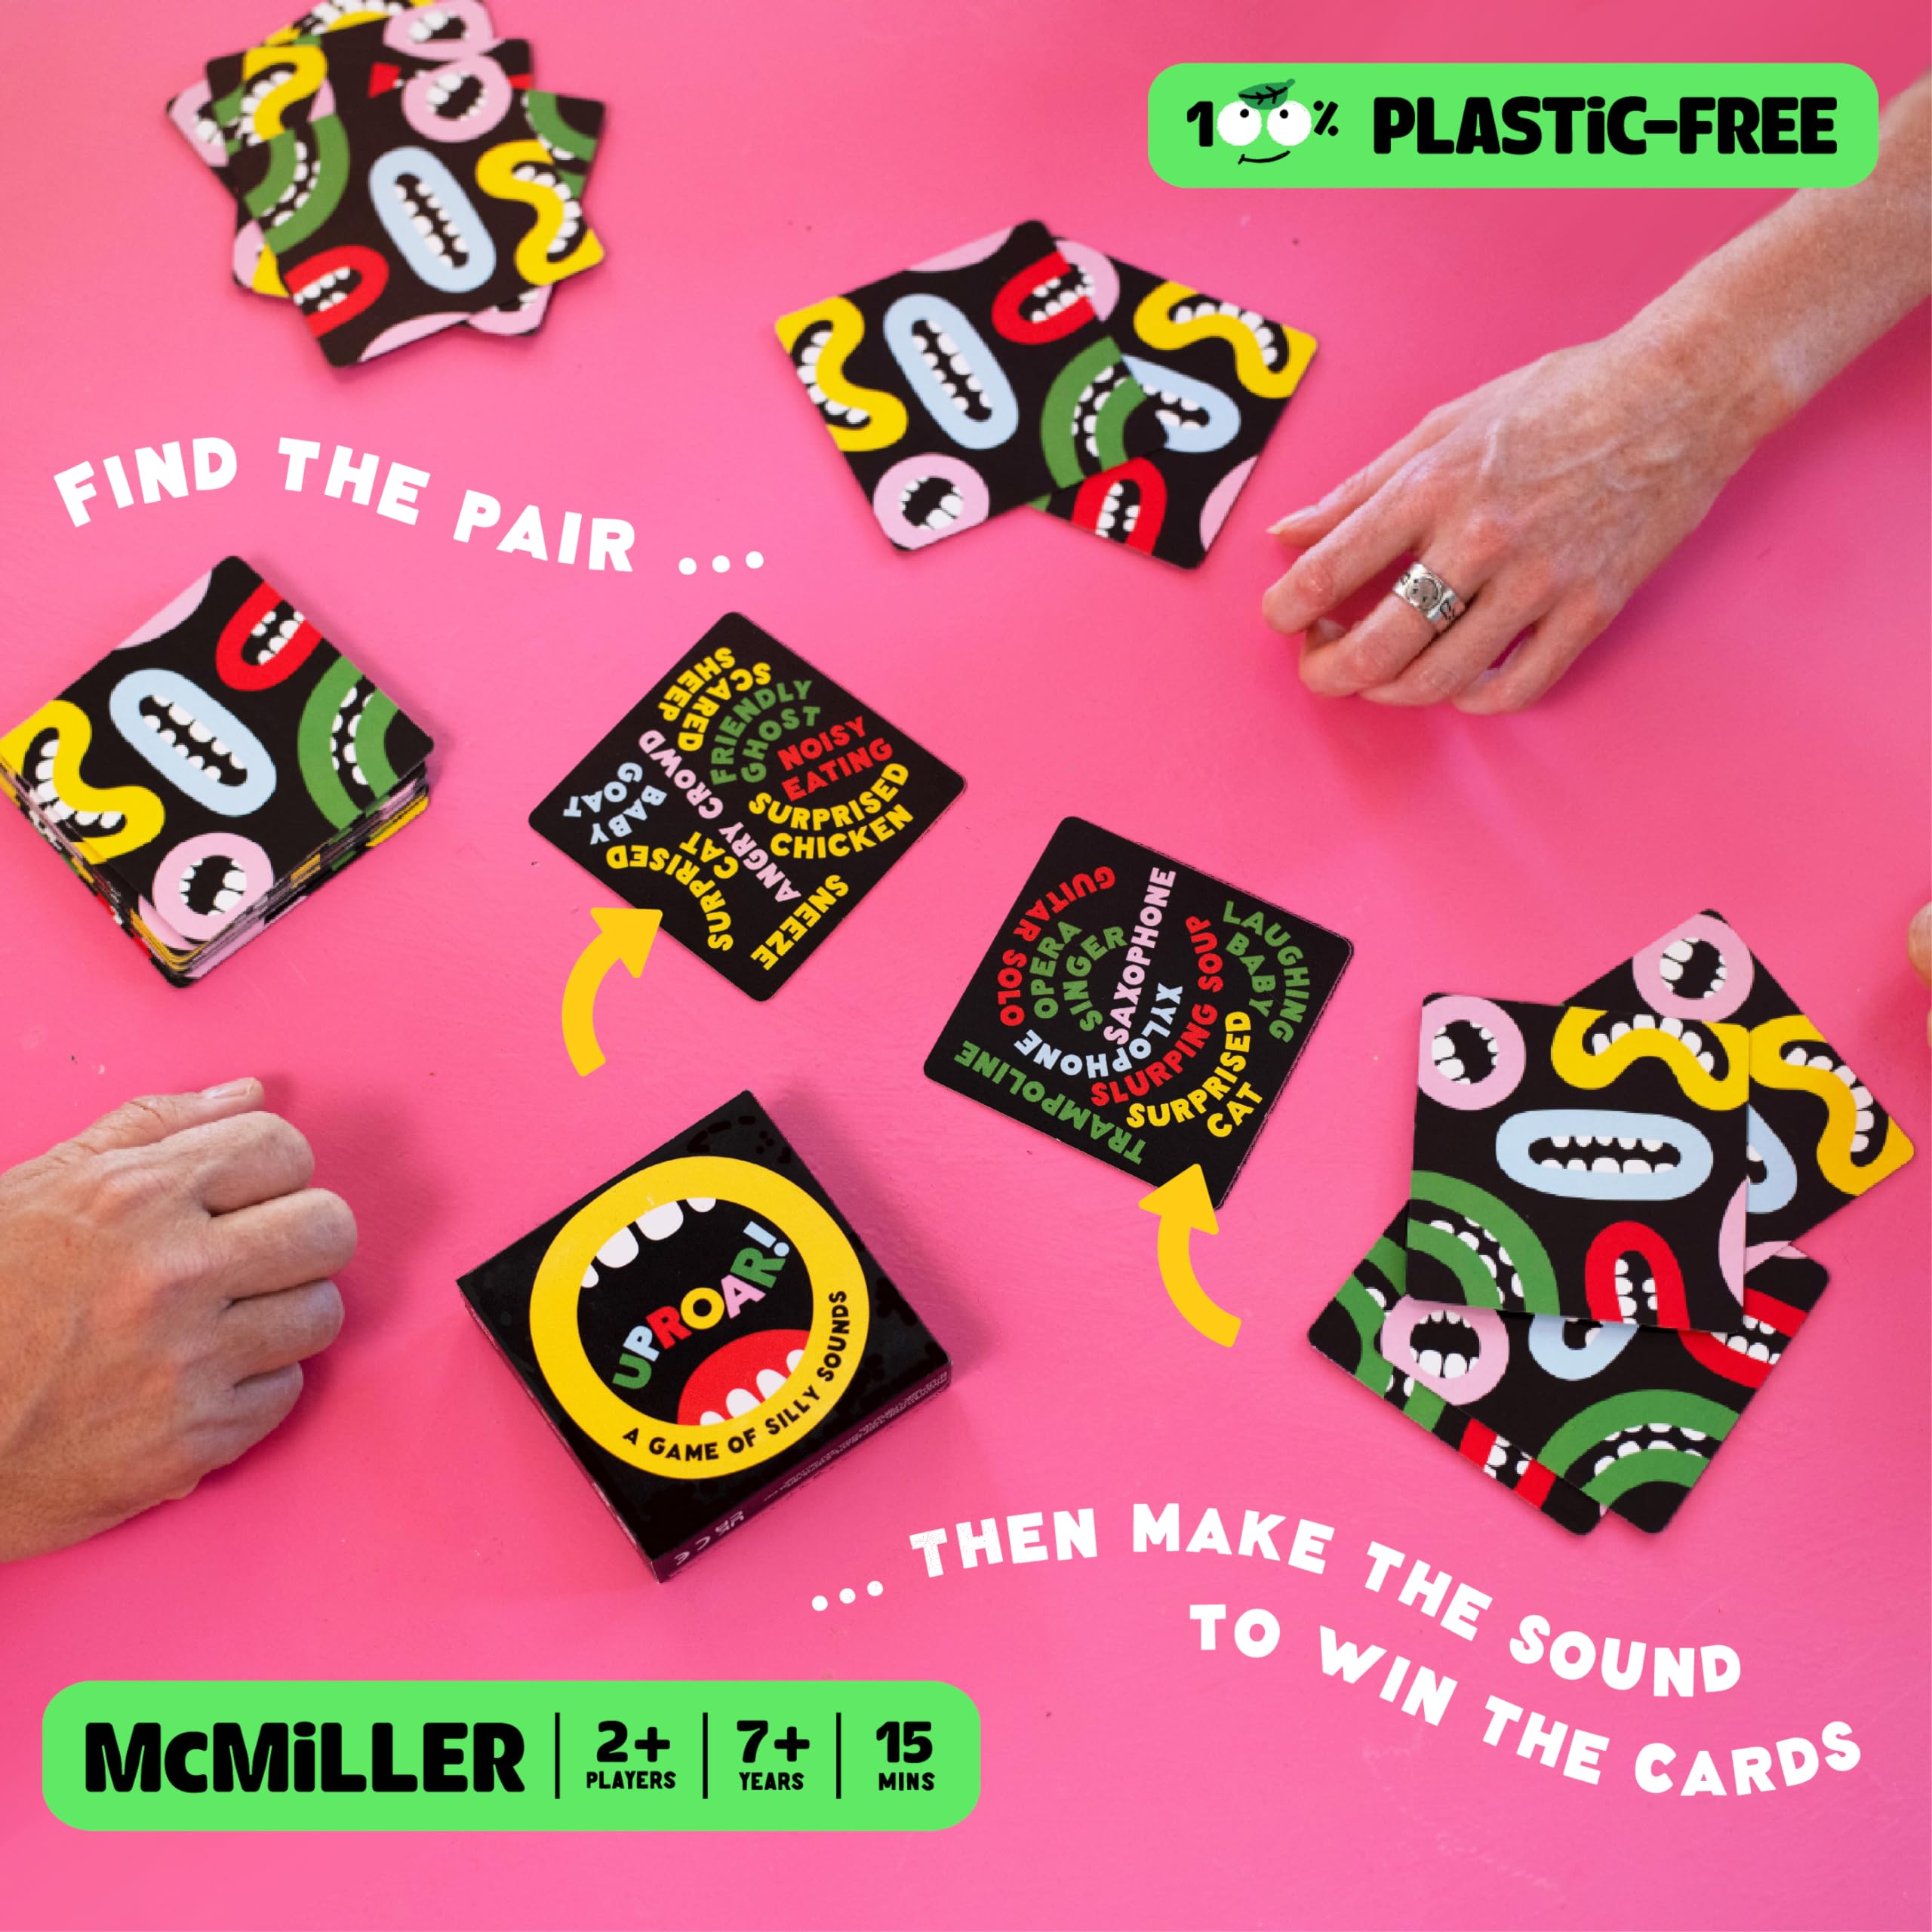 UpRoar! The Card Game of Silly Sounds - Funny Plastic-Free Family Games for Kids, Teens, and Adults, 2+ Players, Ages 7+, Eco, Sustainable, for Party, Fun, Birthday, Game Night, Easter, and Travel.